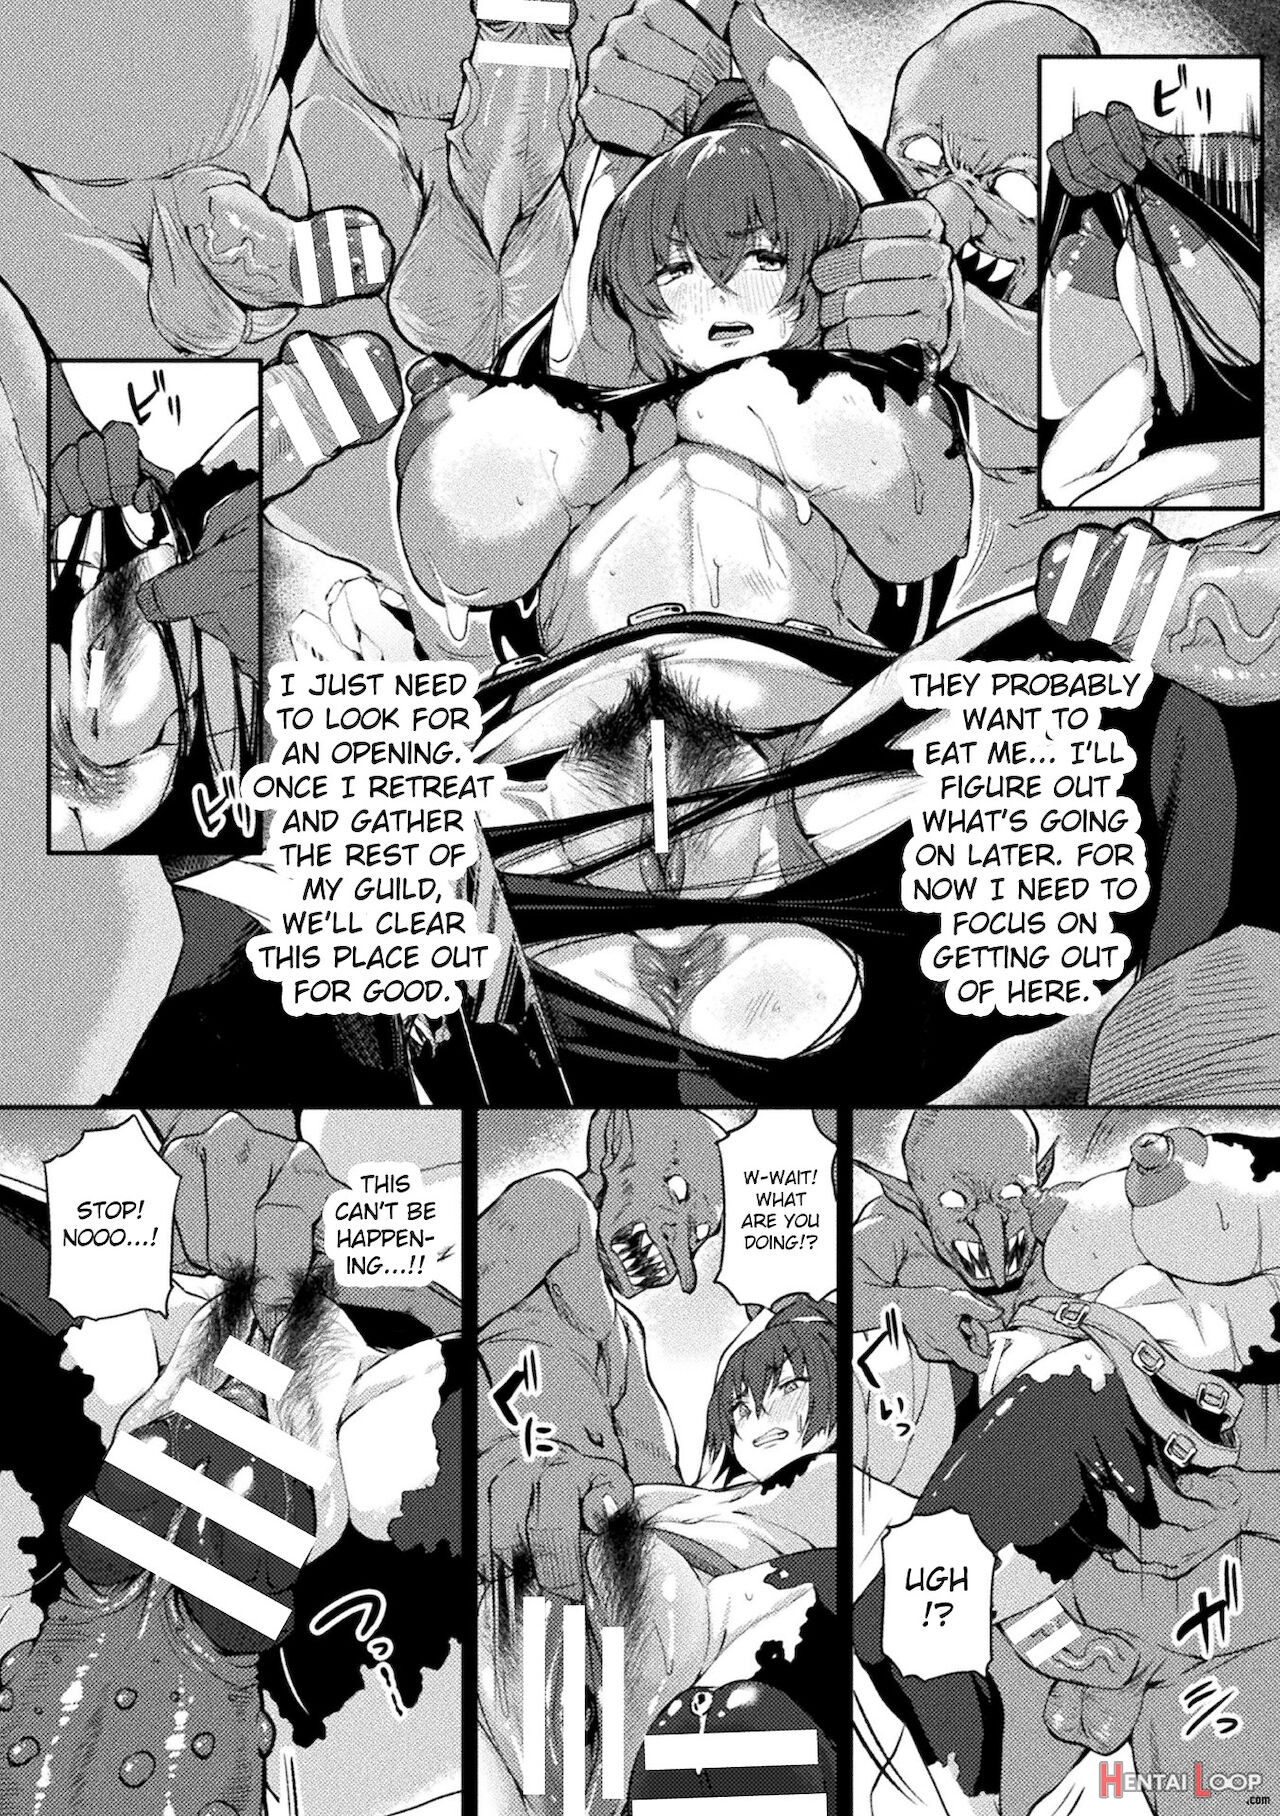 The Strange Chrysalis ~fate Of A Warrior Defeated By Goblins And Turned Into A Woman~ page 10